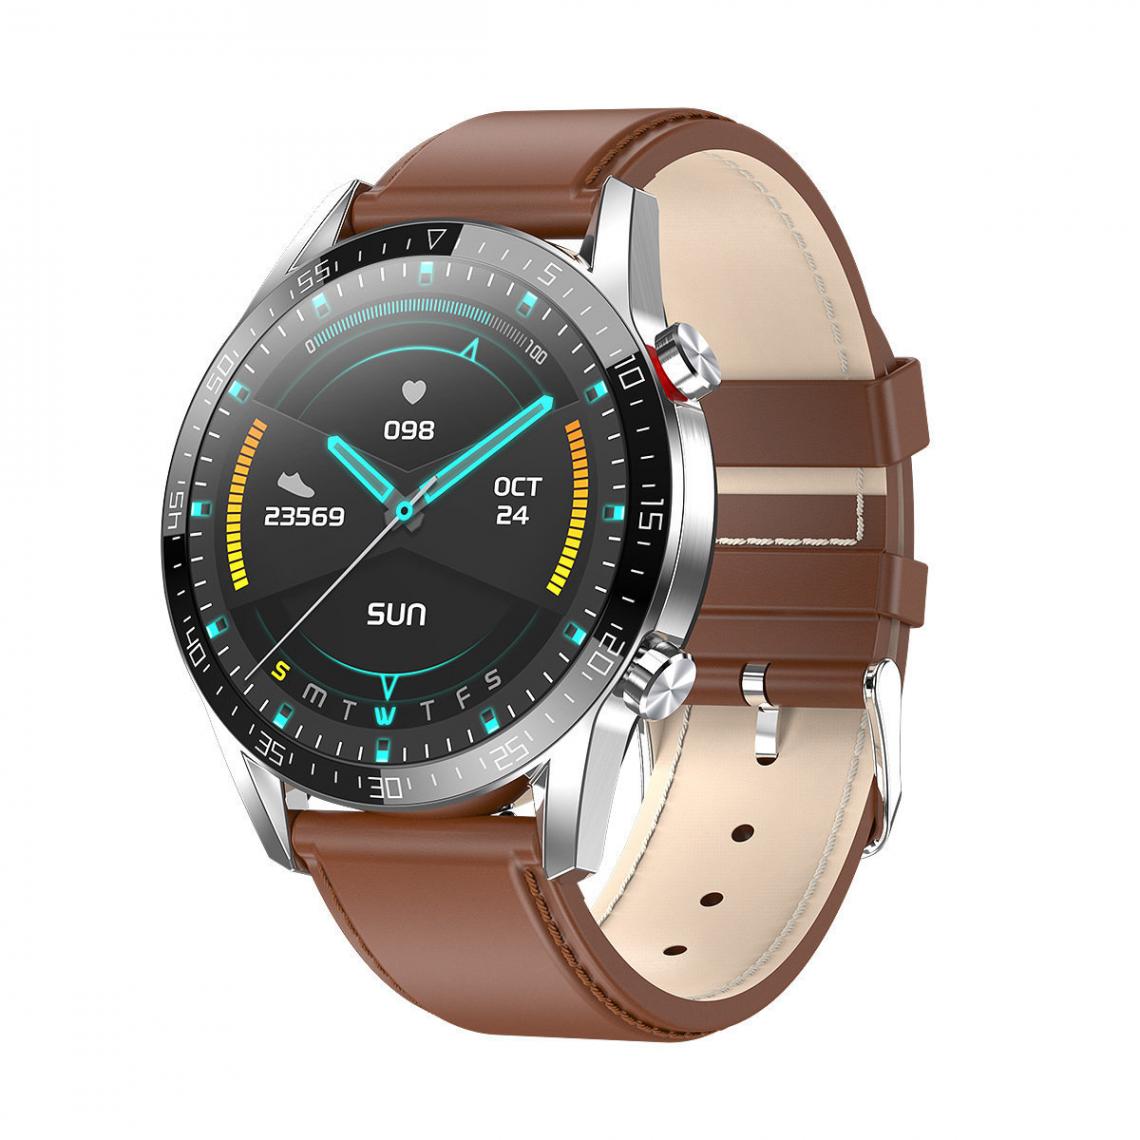 Chronotech Montres - Chronus Smartwatch for men,Fitness Trackers With Receive/Make Call,46mm | ECG monitoring (Brown) - Montre connectée